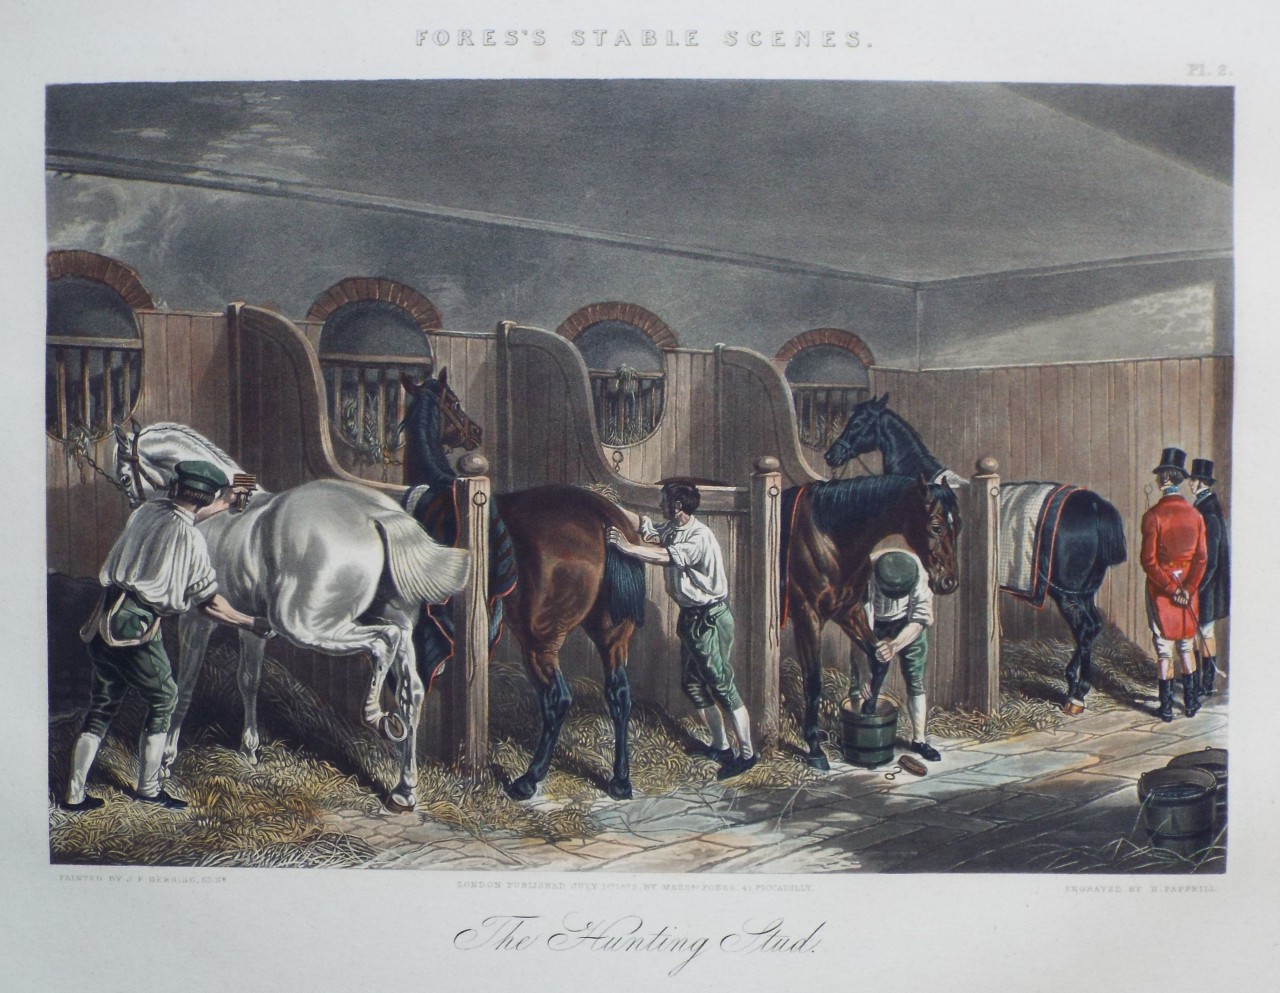 Aquatint - Fores's Stable Scenes. The Hunting Stud. - Papprill